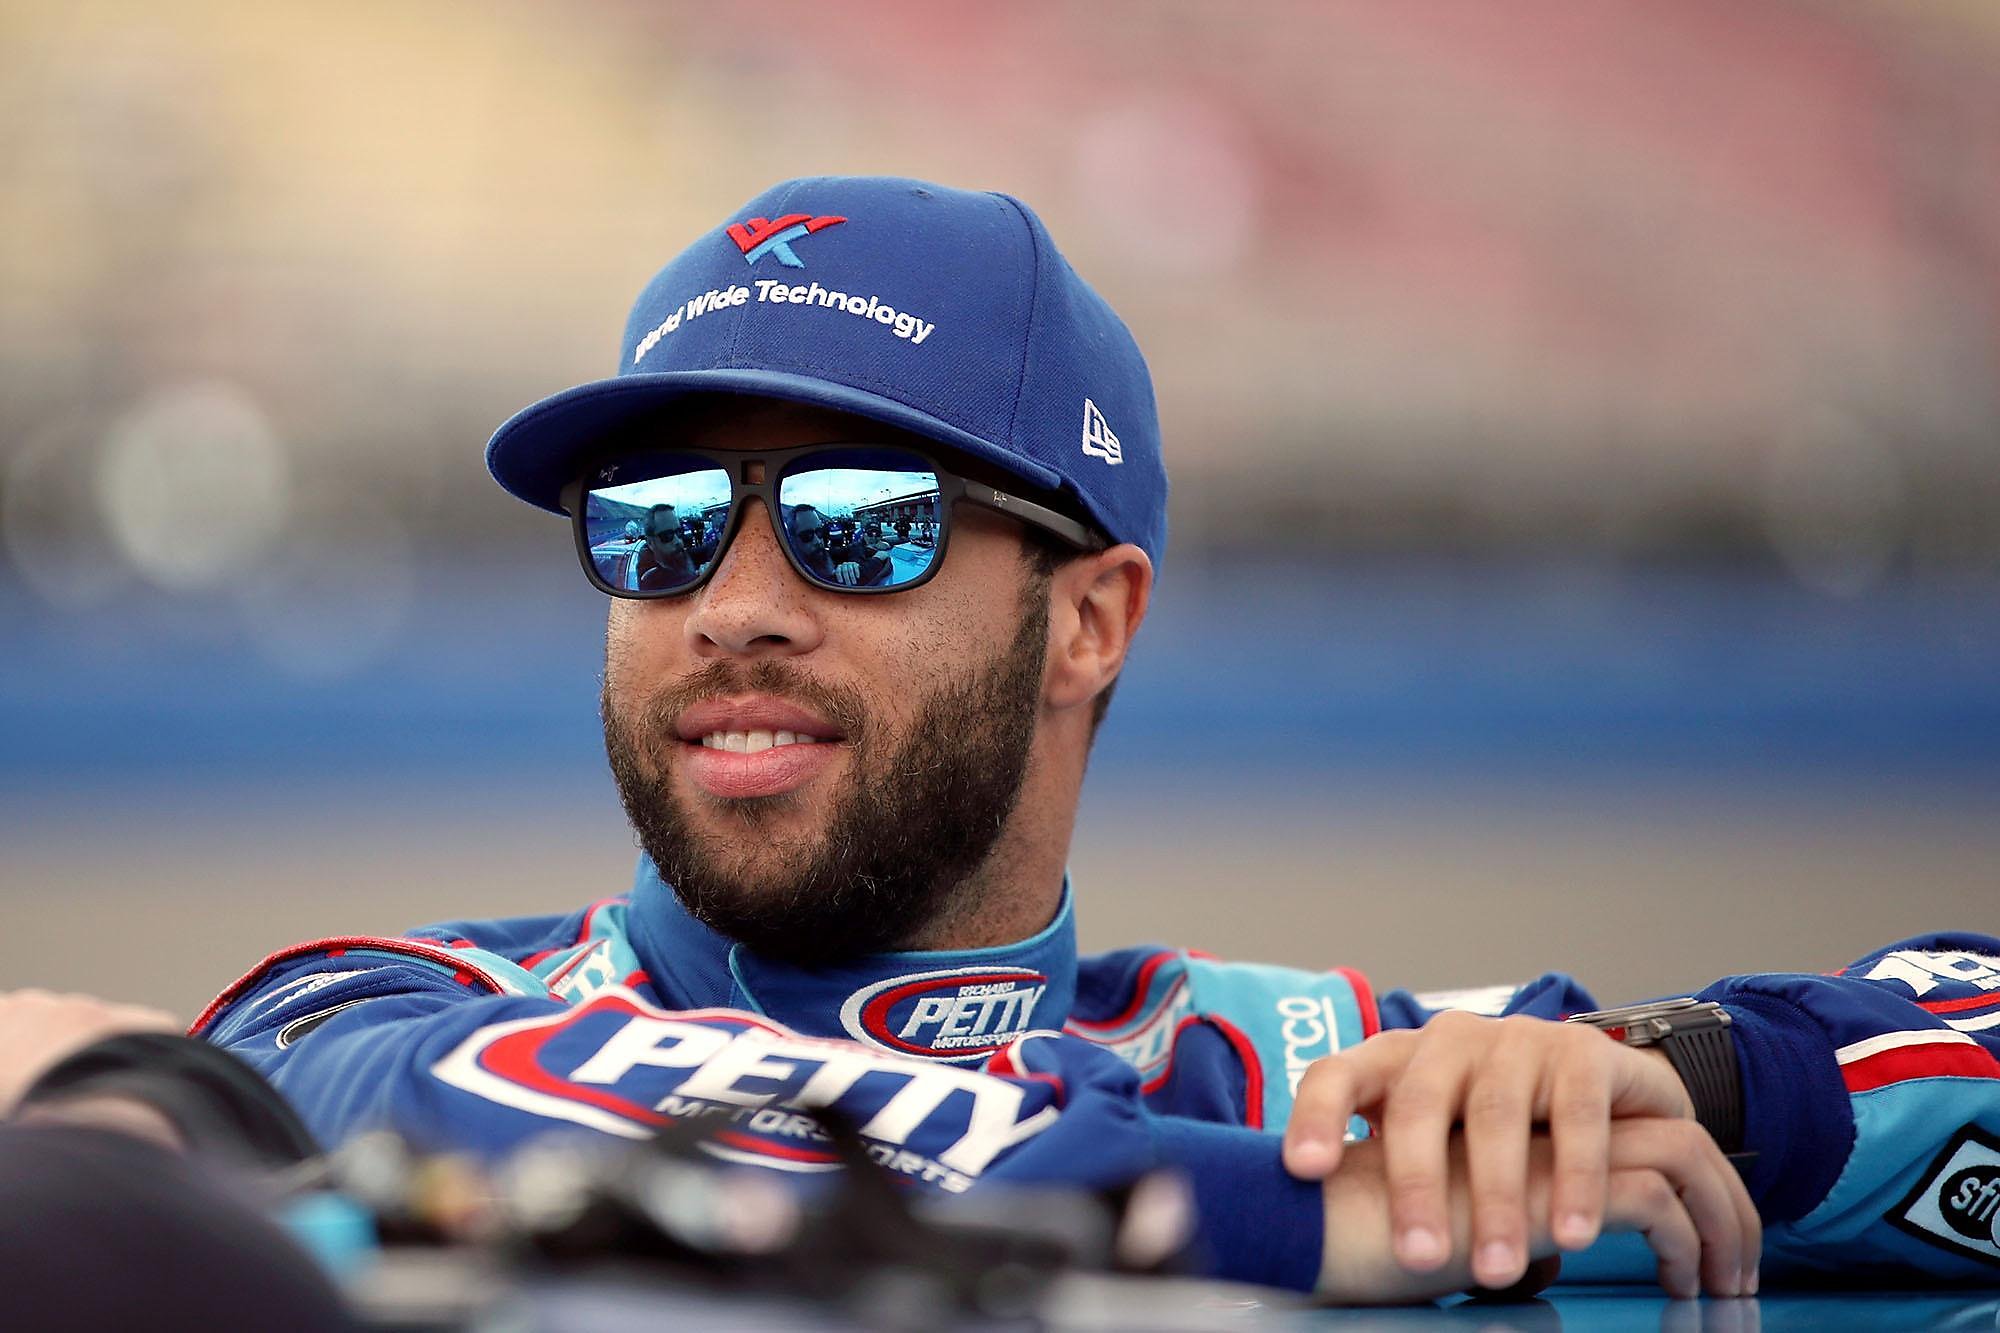 Noose found in stall of Bubba Wallace at Alabama NASCAR race.